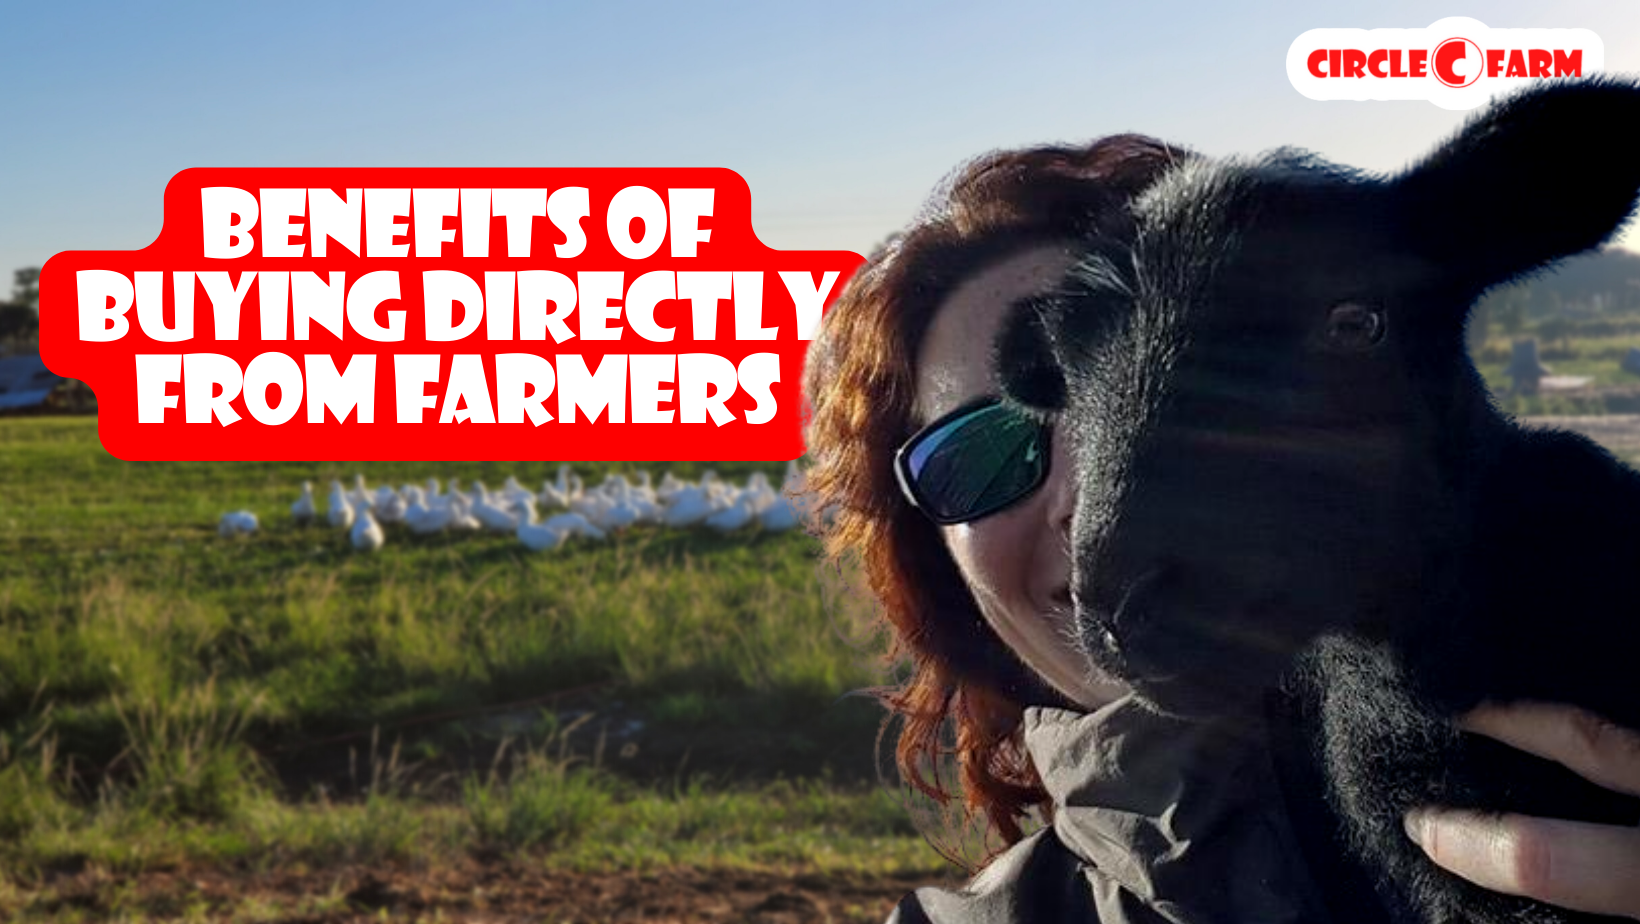 The benefits of buying directly from farmers, including supporting local communities and the economy